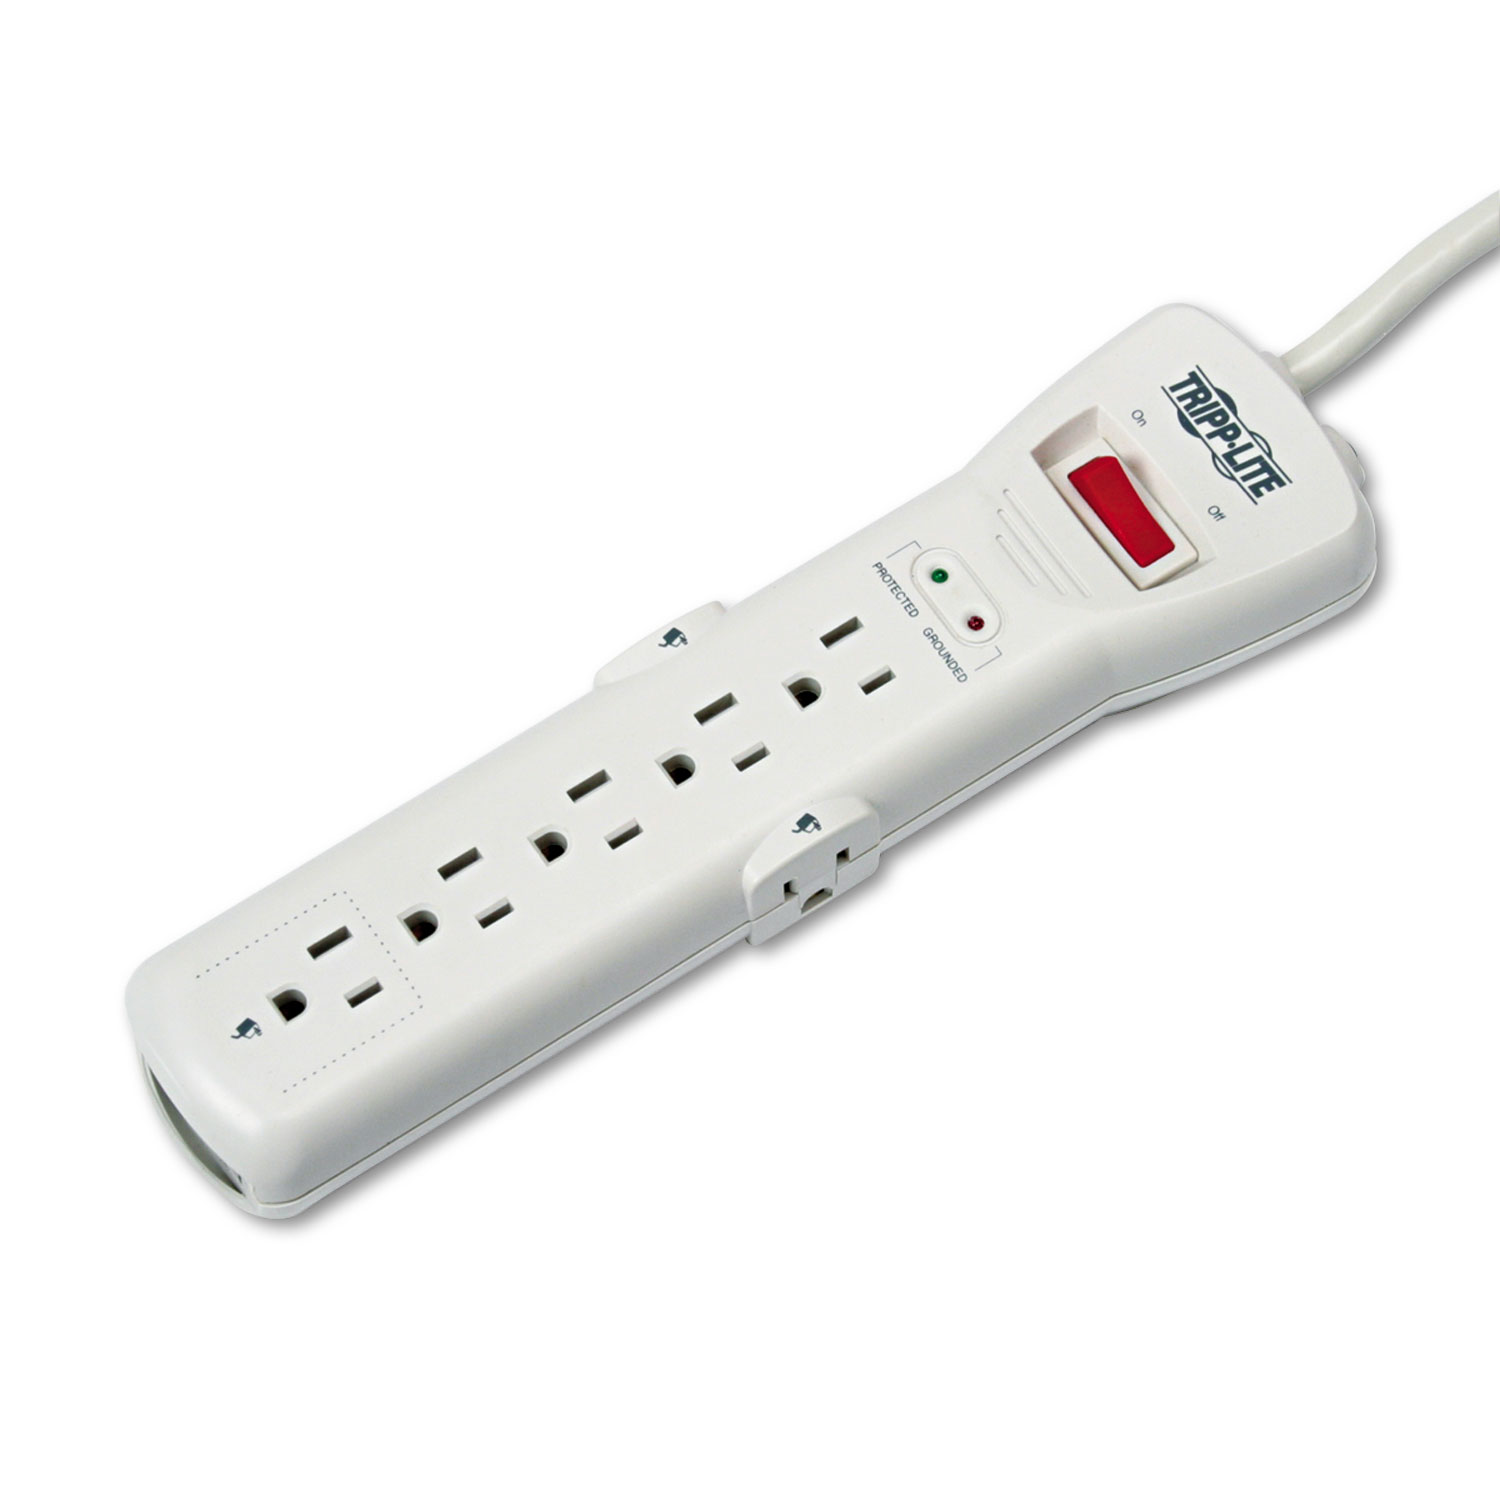  Tripp Lite SUPER7TEL15 Protect It! Surge Protector, 7 Outlets, 15 ft. Cord, 2520 Joules, Light Gray (TRPSUPER7TEL15) 